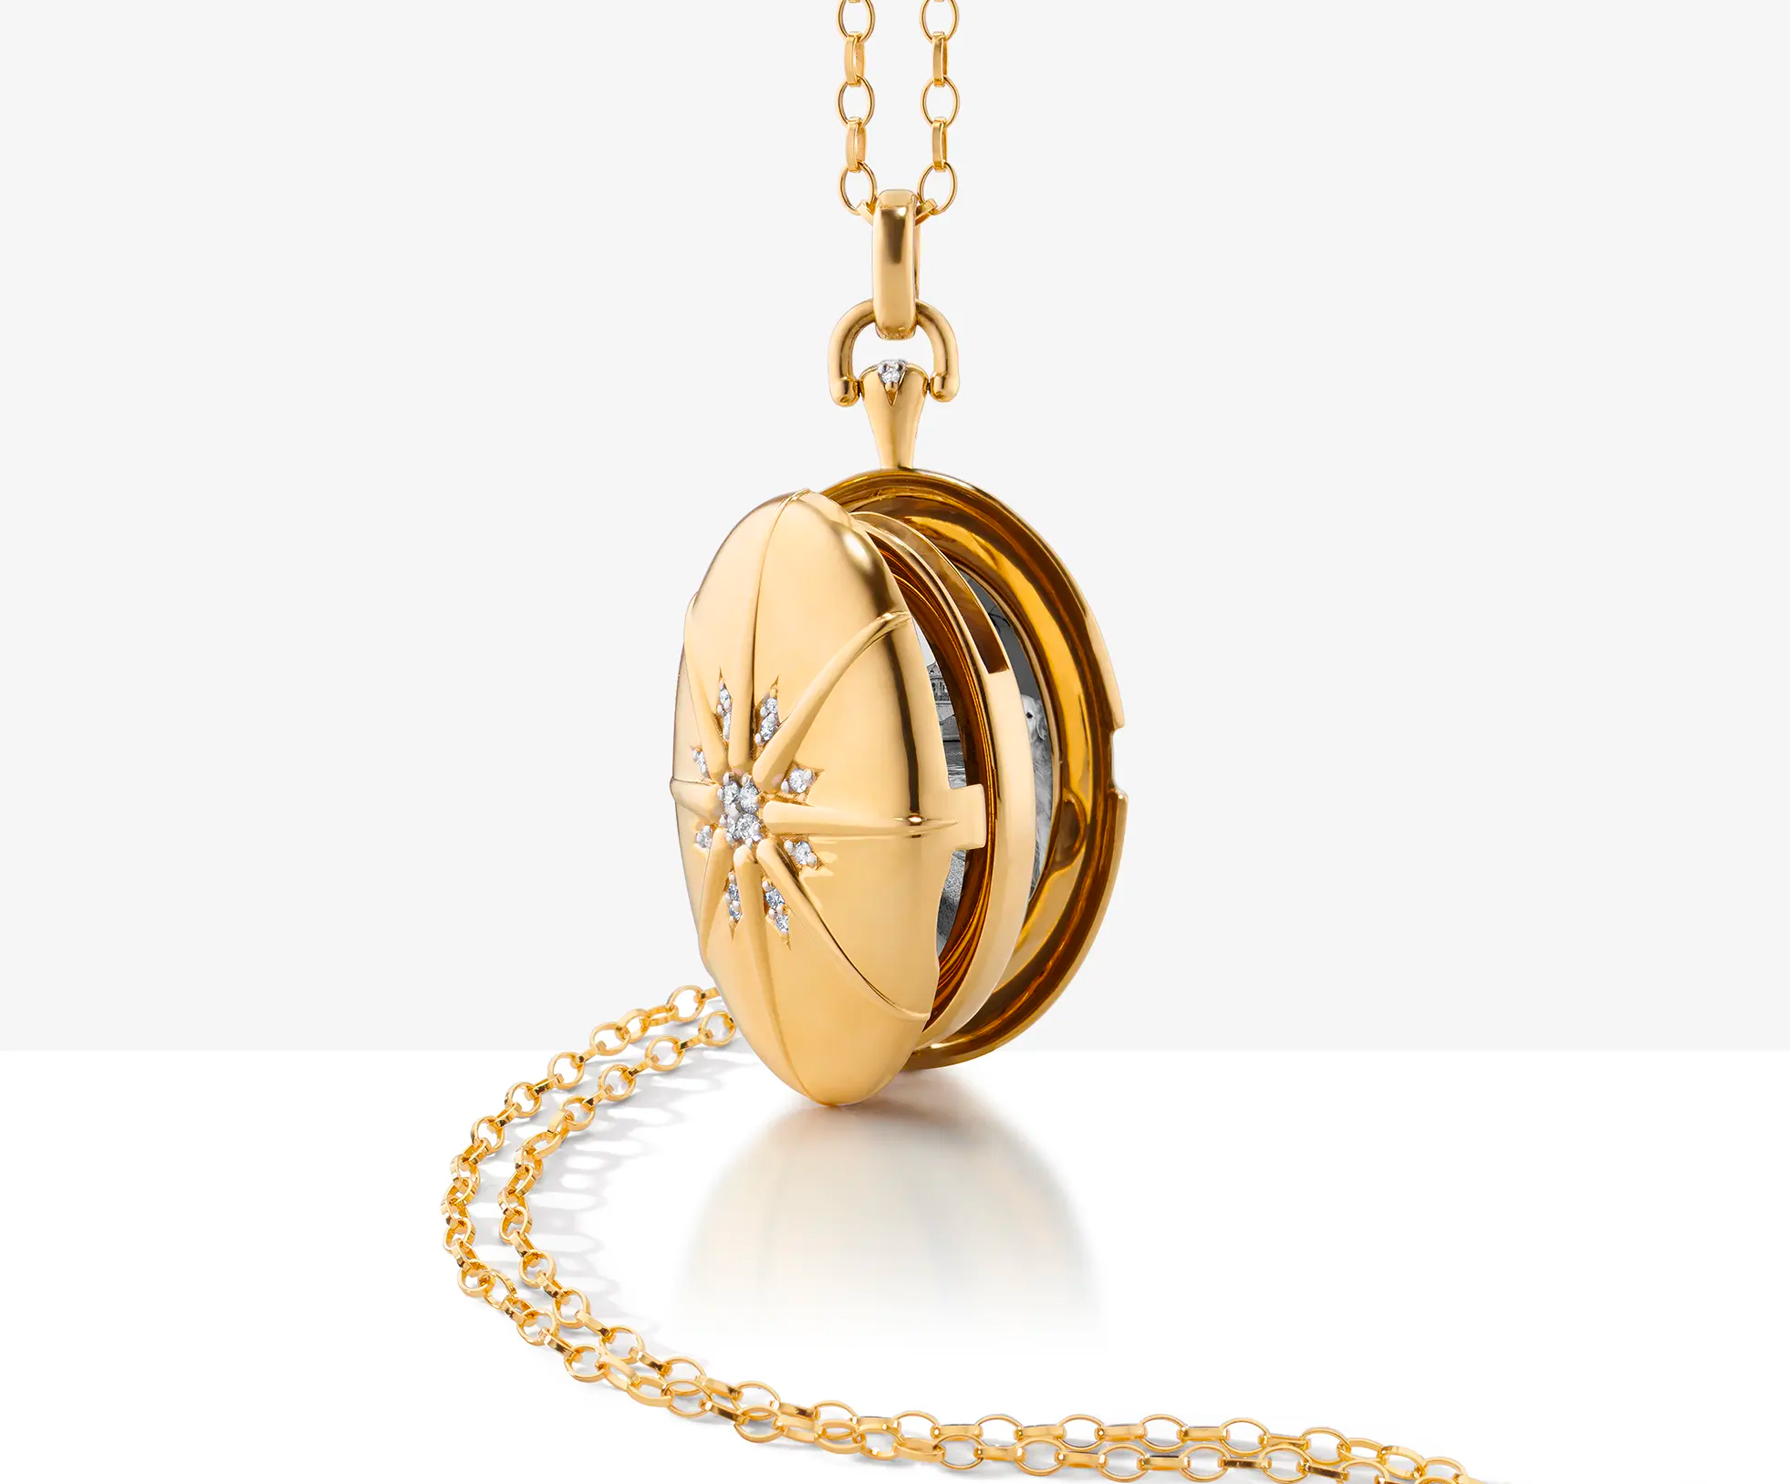 The Locket Pendant Collection